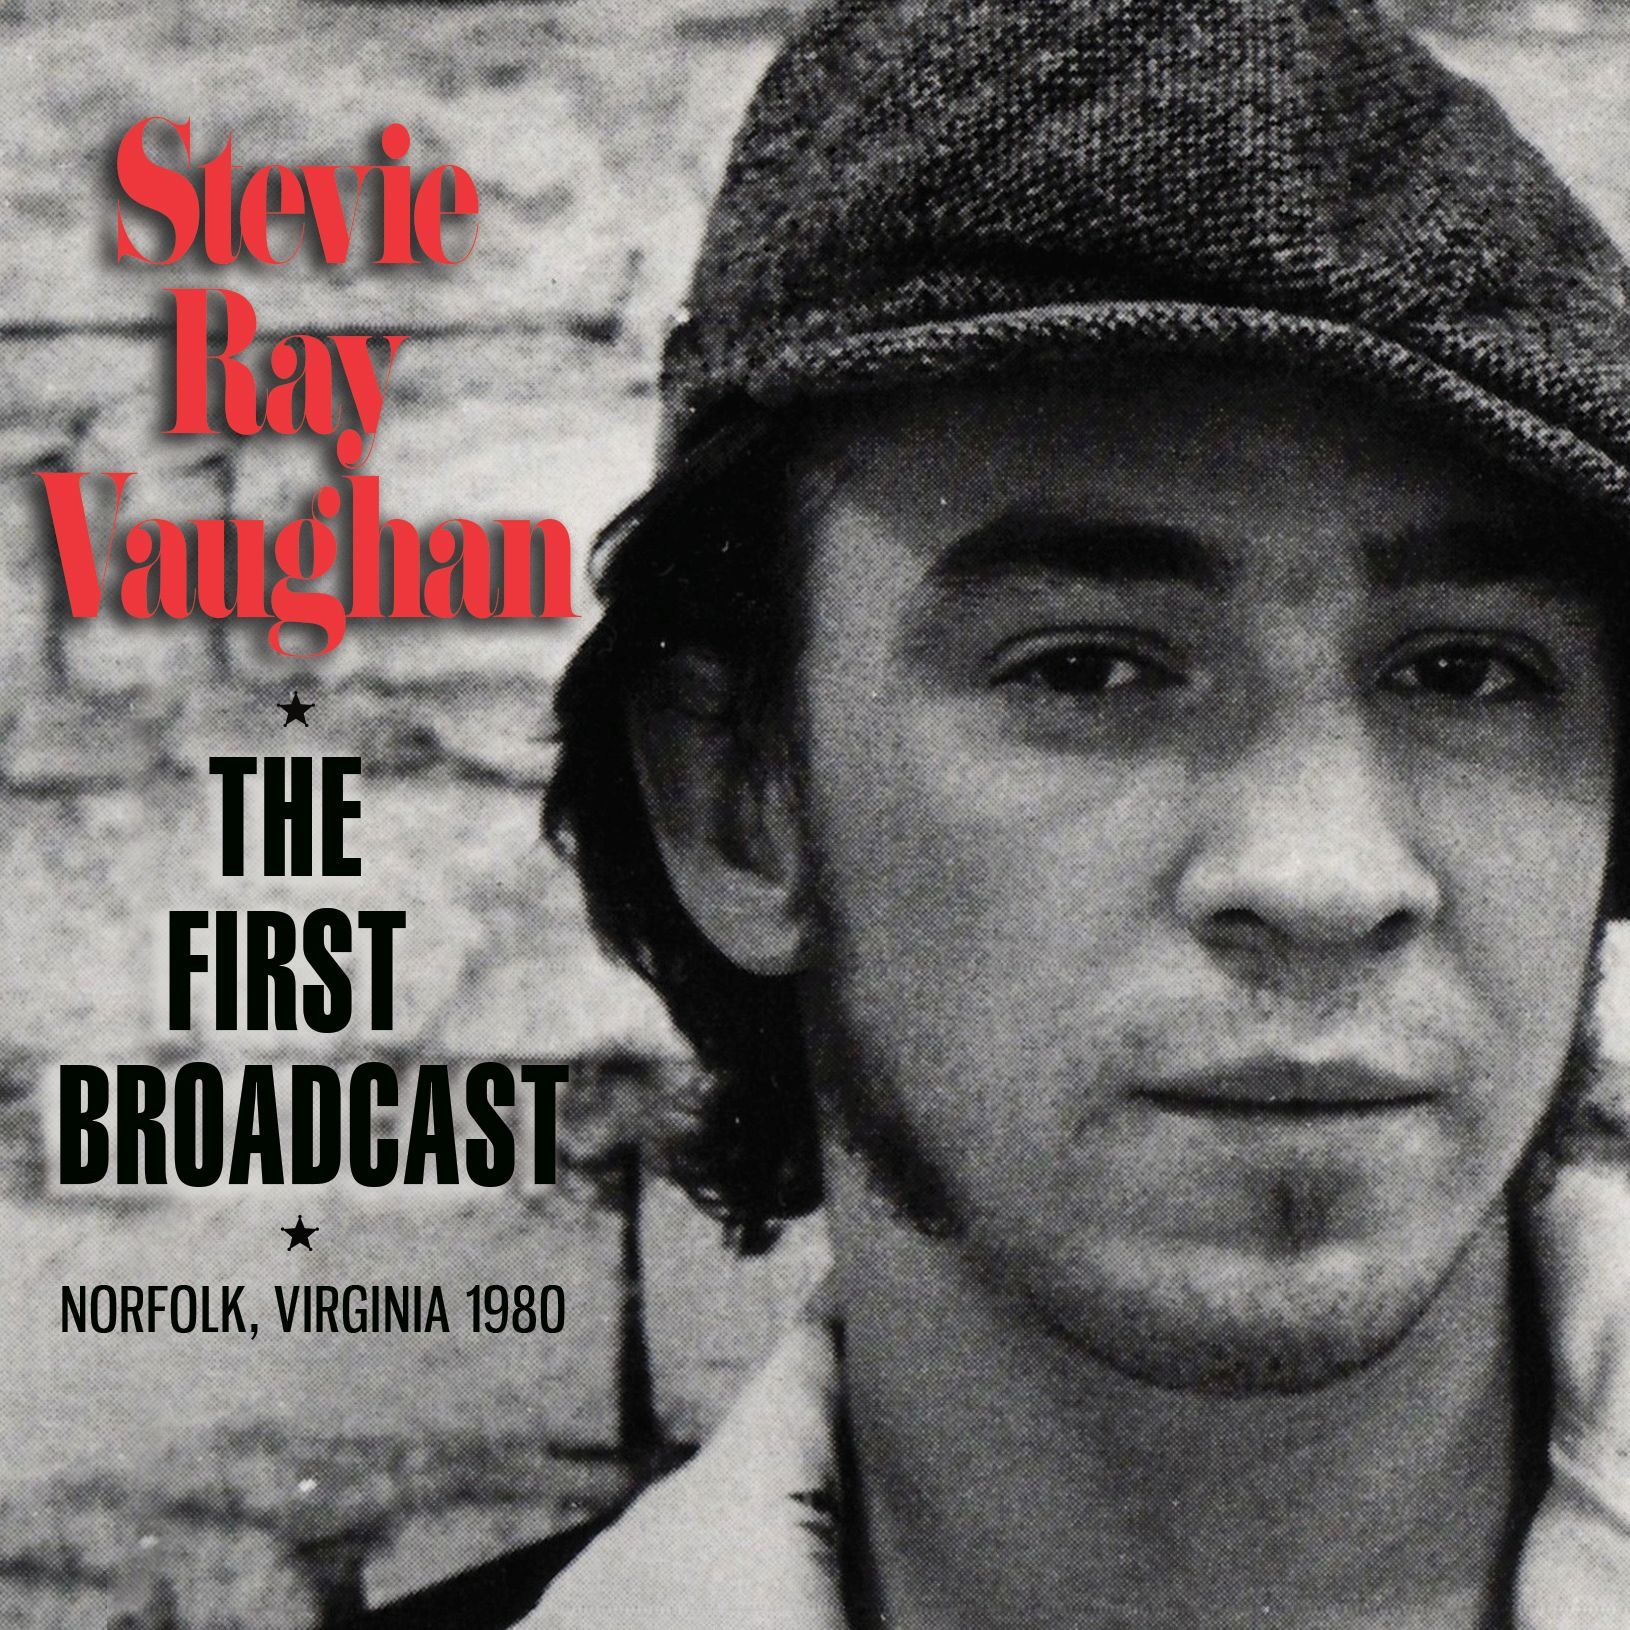 Stevie Ray Vaughan The First Broadcast